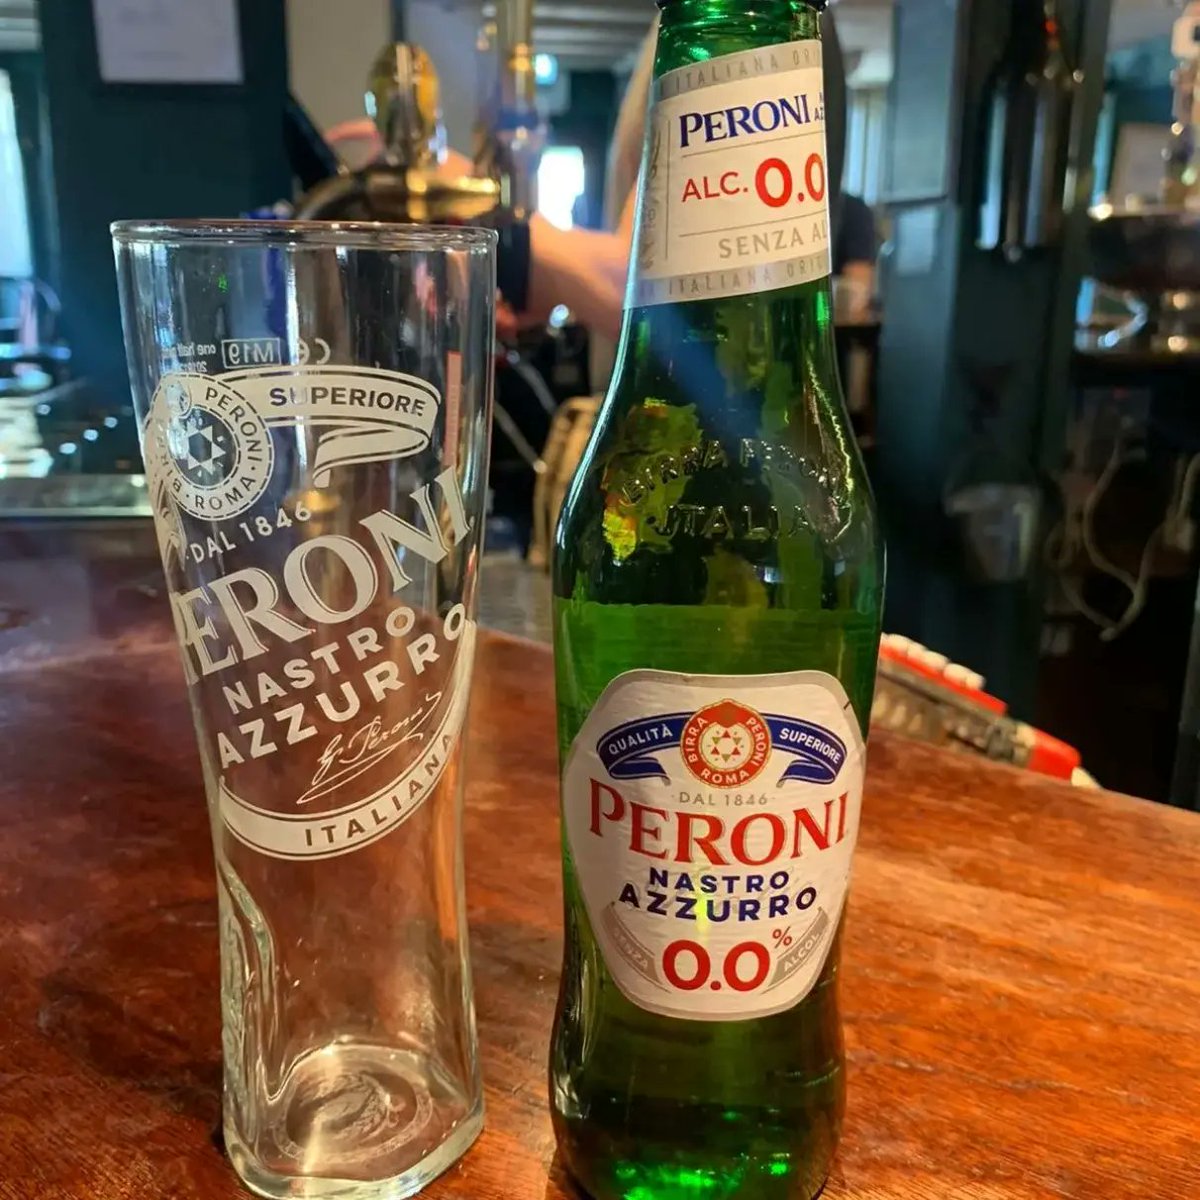 Designated driver this long weekend, or just fancy something else? Fear not we have a fab range of no & low alcohol options waiting just for you! 🍻

#LowAlcohol #Drinks #Beer #Gin #LowABV #LowAlcoholBeer